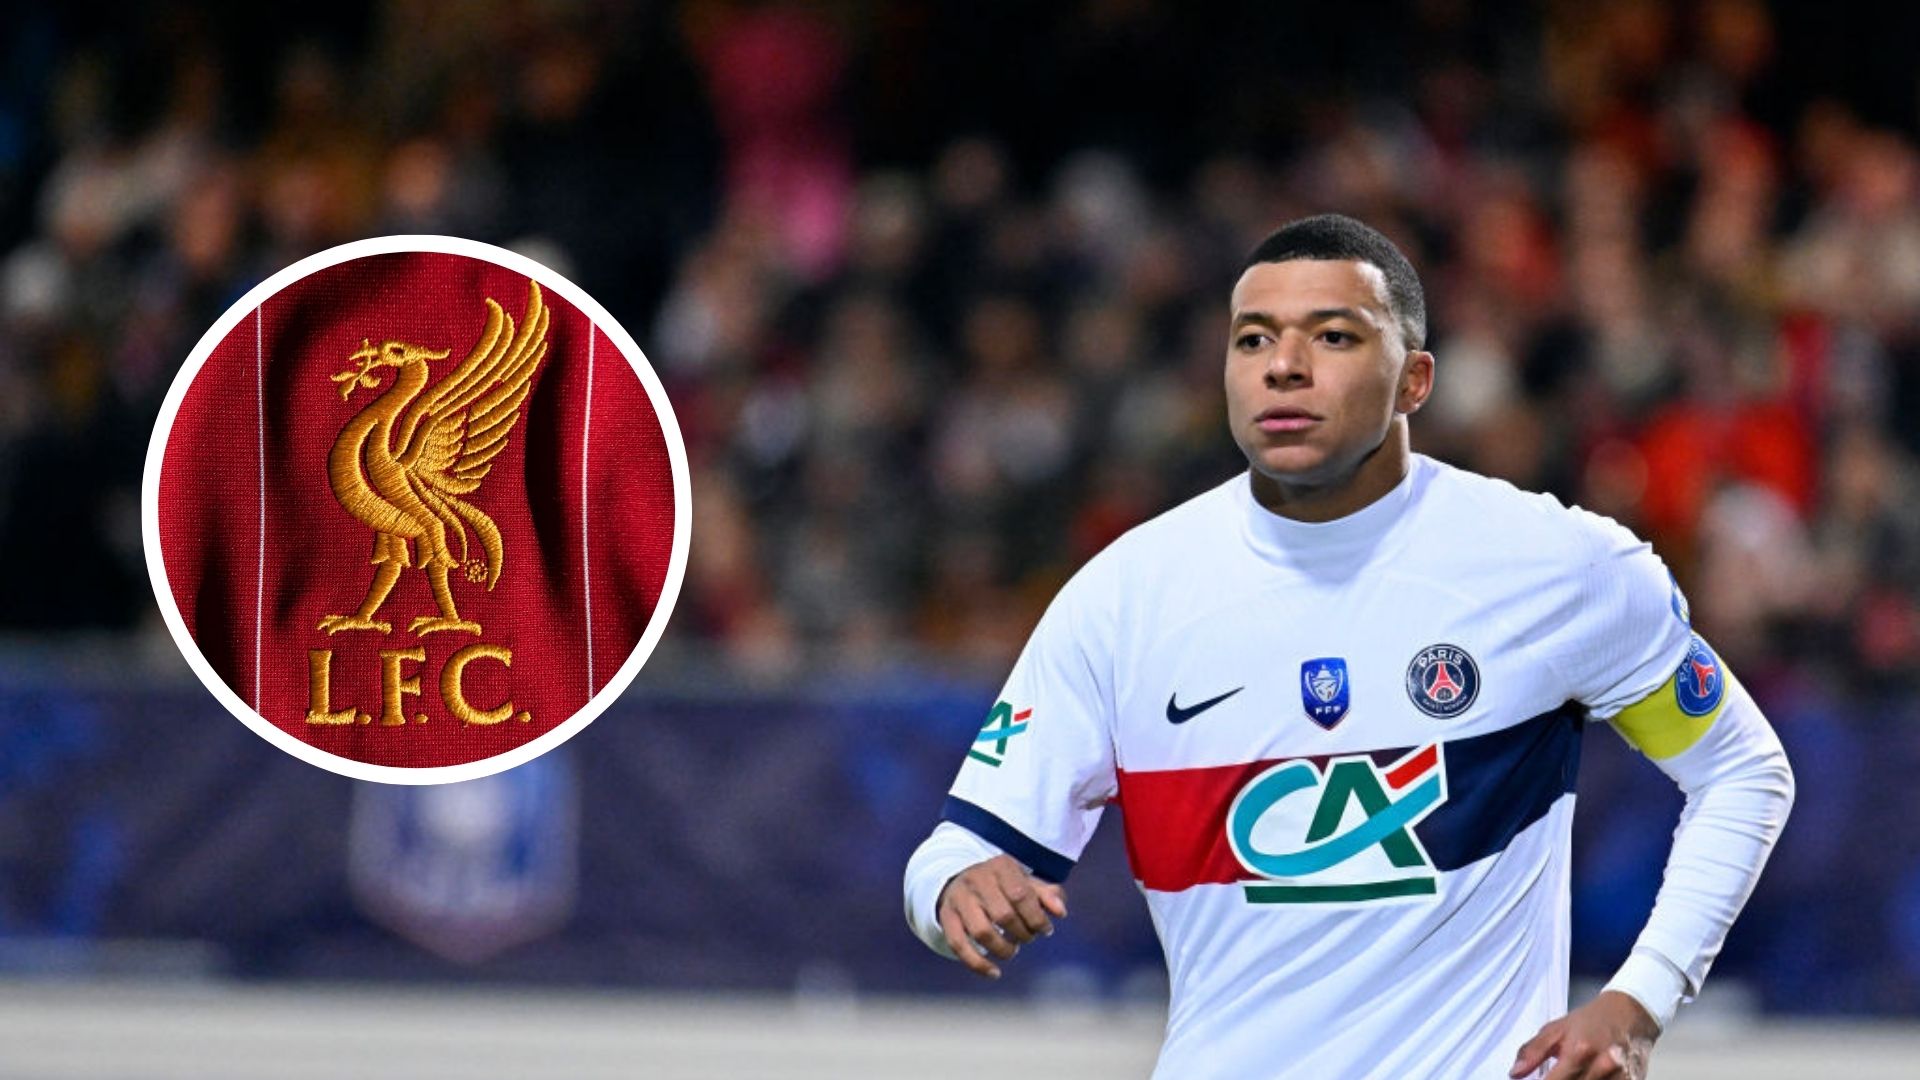 Liverpool 'in contact' with Kylian Mbappe over sensational summer move: report